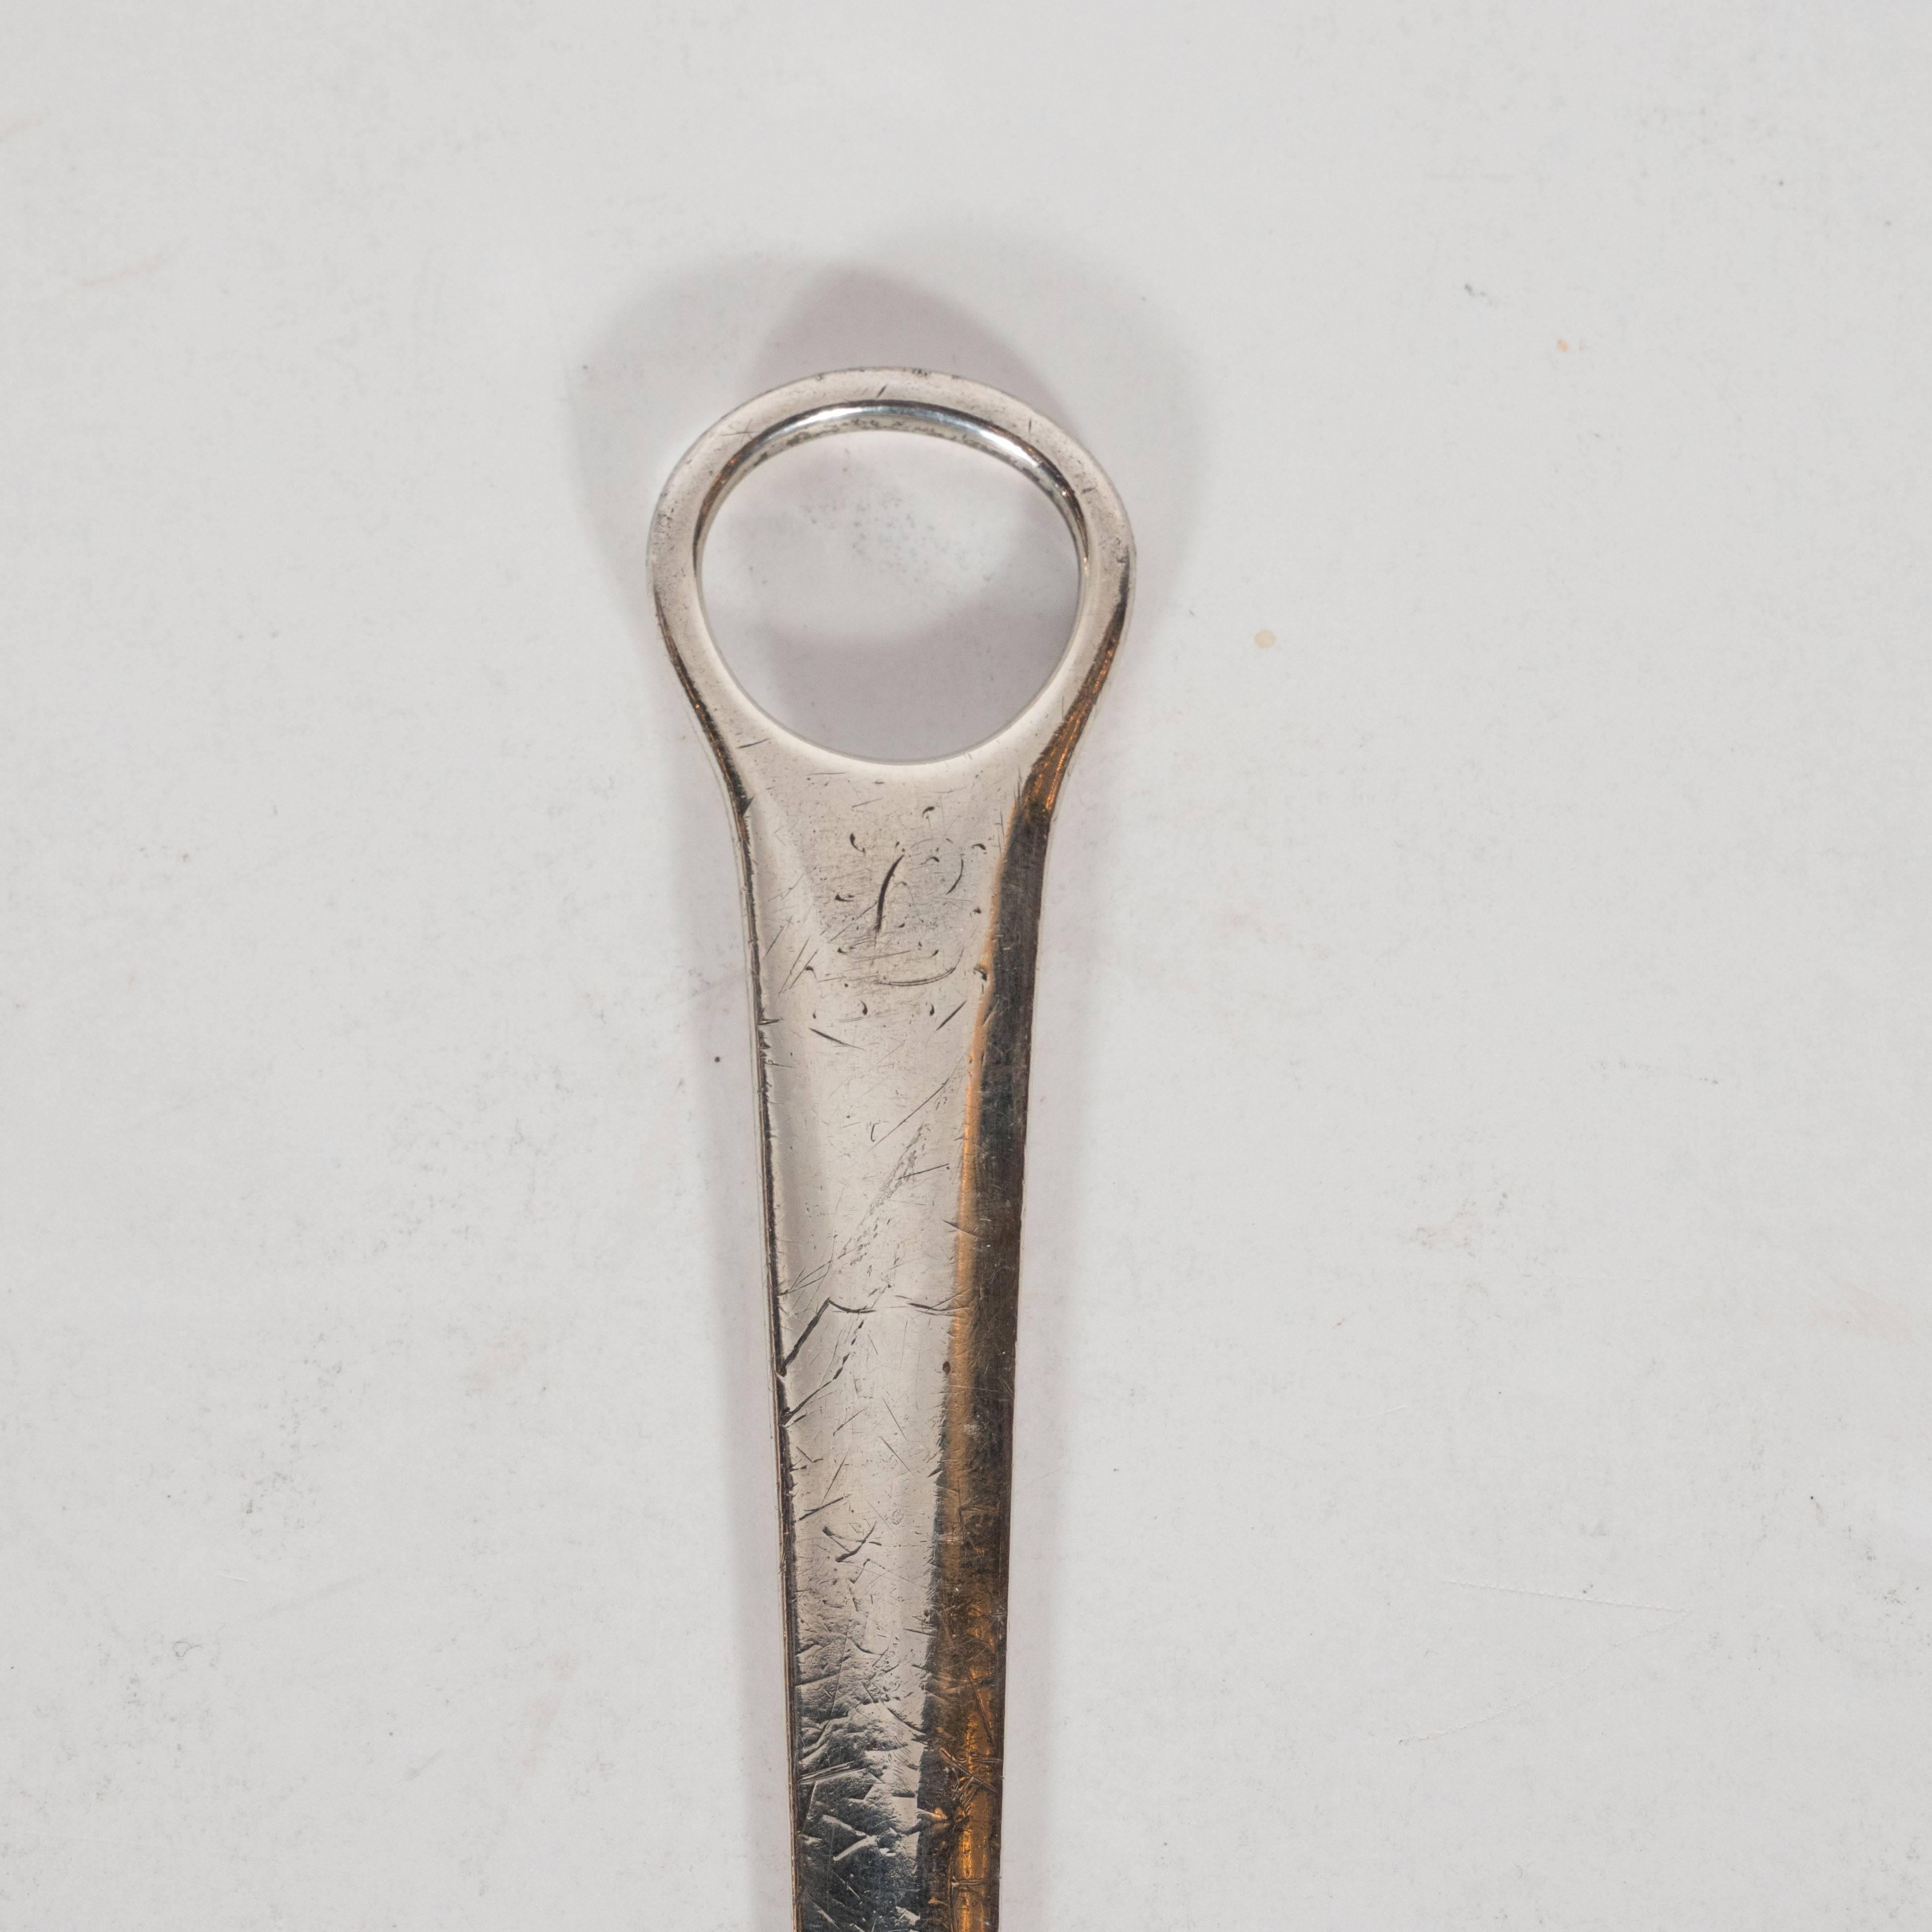 This elegant letter opener was forged by the esteemed British silversmith company Robert Cruickshank in London during the 18th century. It features an ovoid opening and a tapered and subtly bowed body that tapers to a point. The silvermarks near